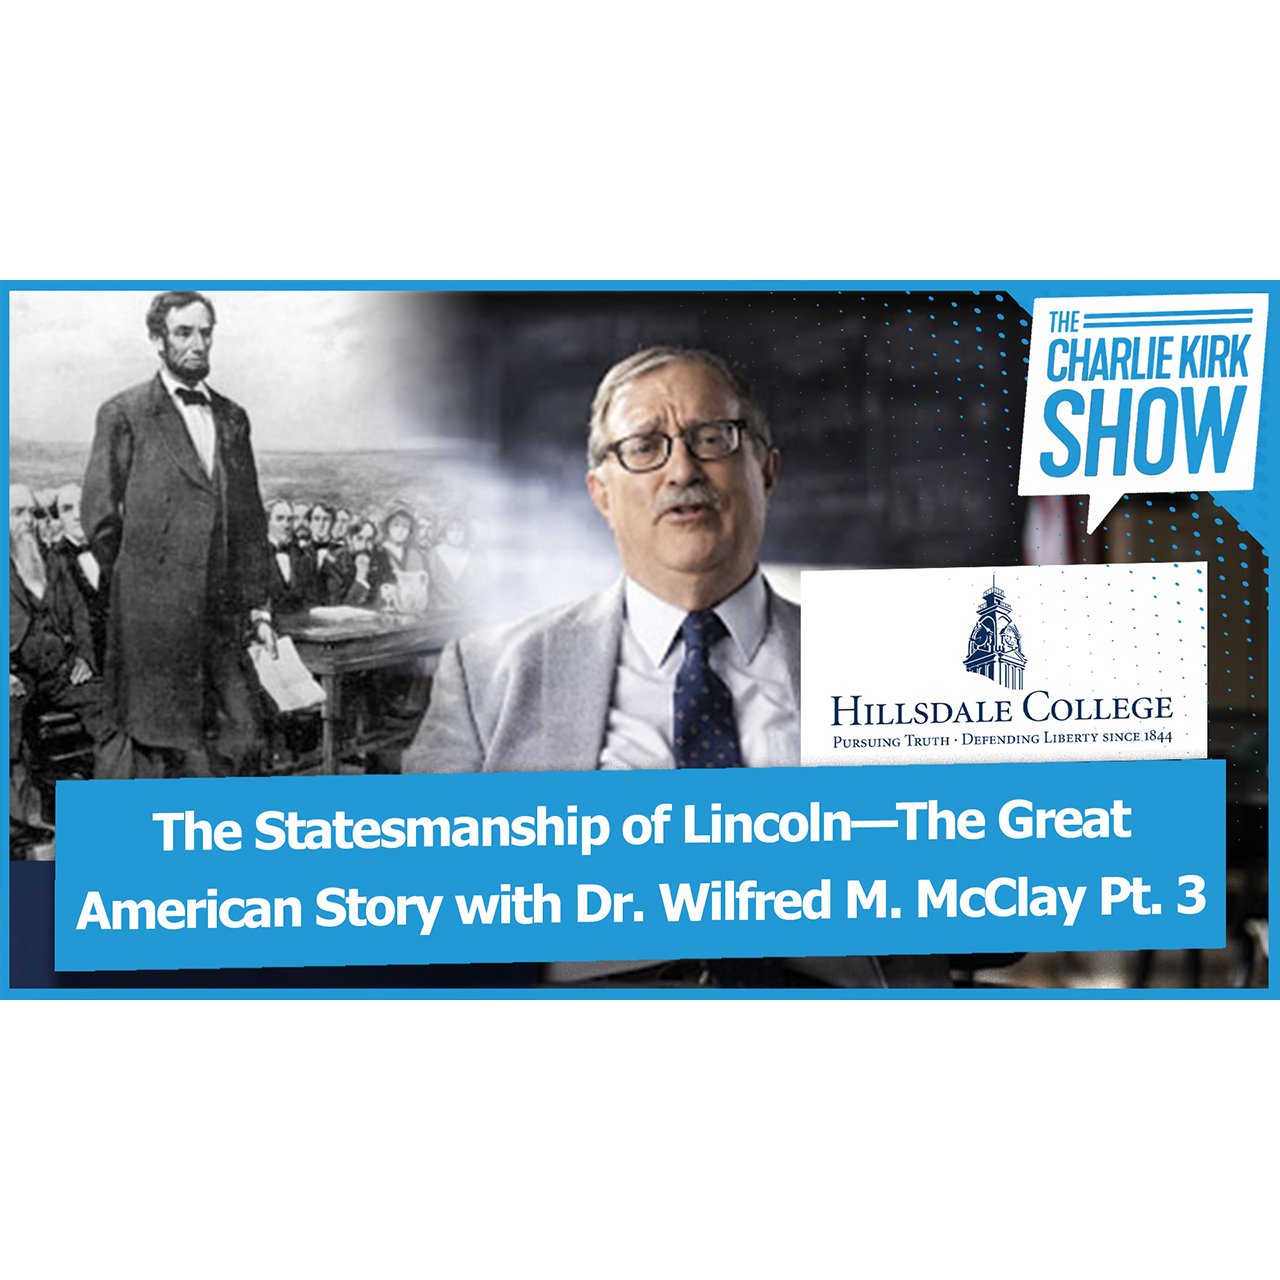 The Statesmanship of Lincoln—The Great American Story with Dr. Wilfred M. McClay (Part 3)